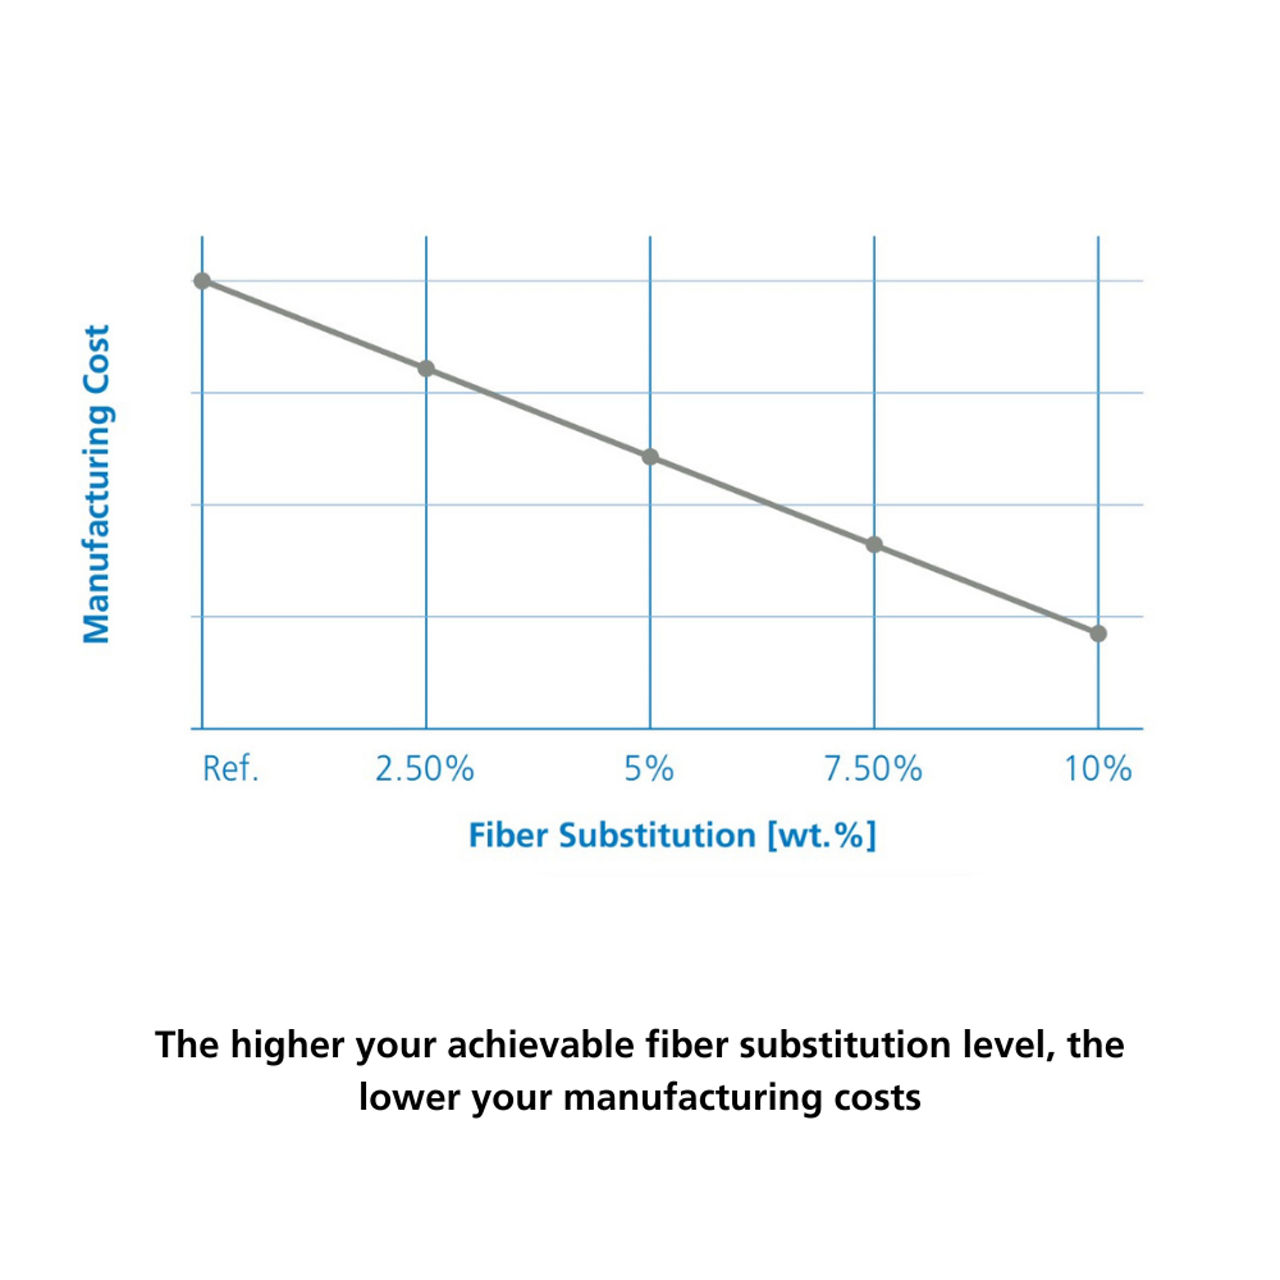 The higher your achievable fiber substitution level, the lower your manufacturing costs - 1